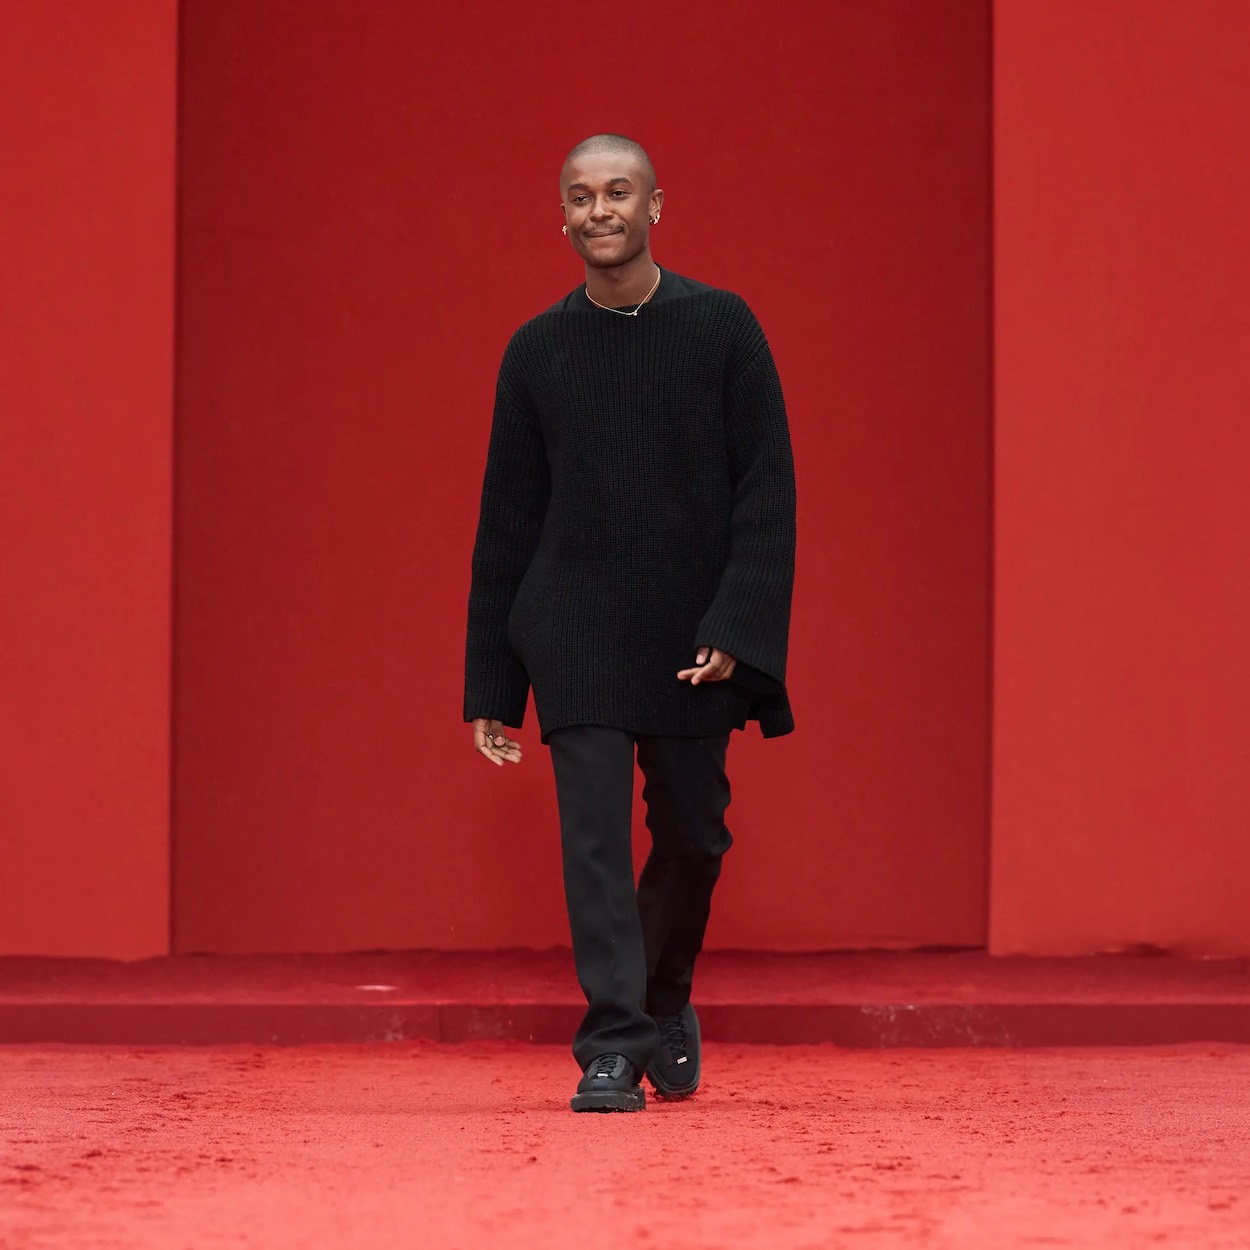 WHO IS PETER DO, THE ELUSIVE DESIGNER NOW AT THE HELM OF HELMUT